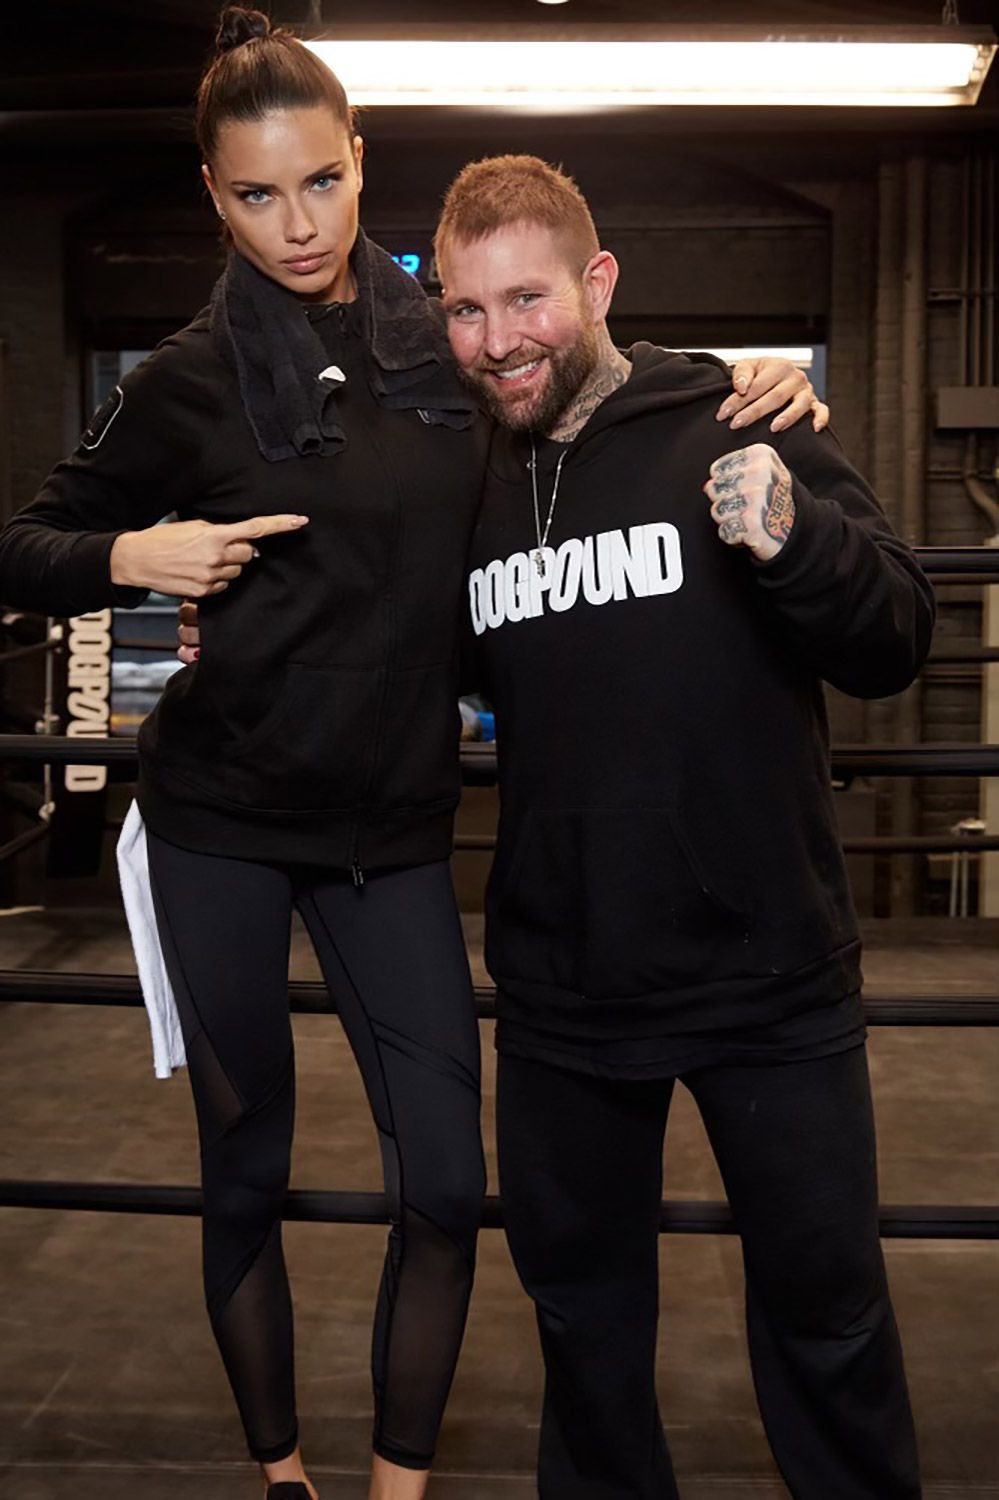 Adriana Lima on Her New Partnership with Dogpound Gym: ‘I Find This Part of My Life Super Important’